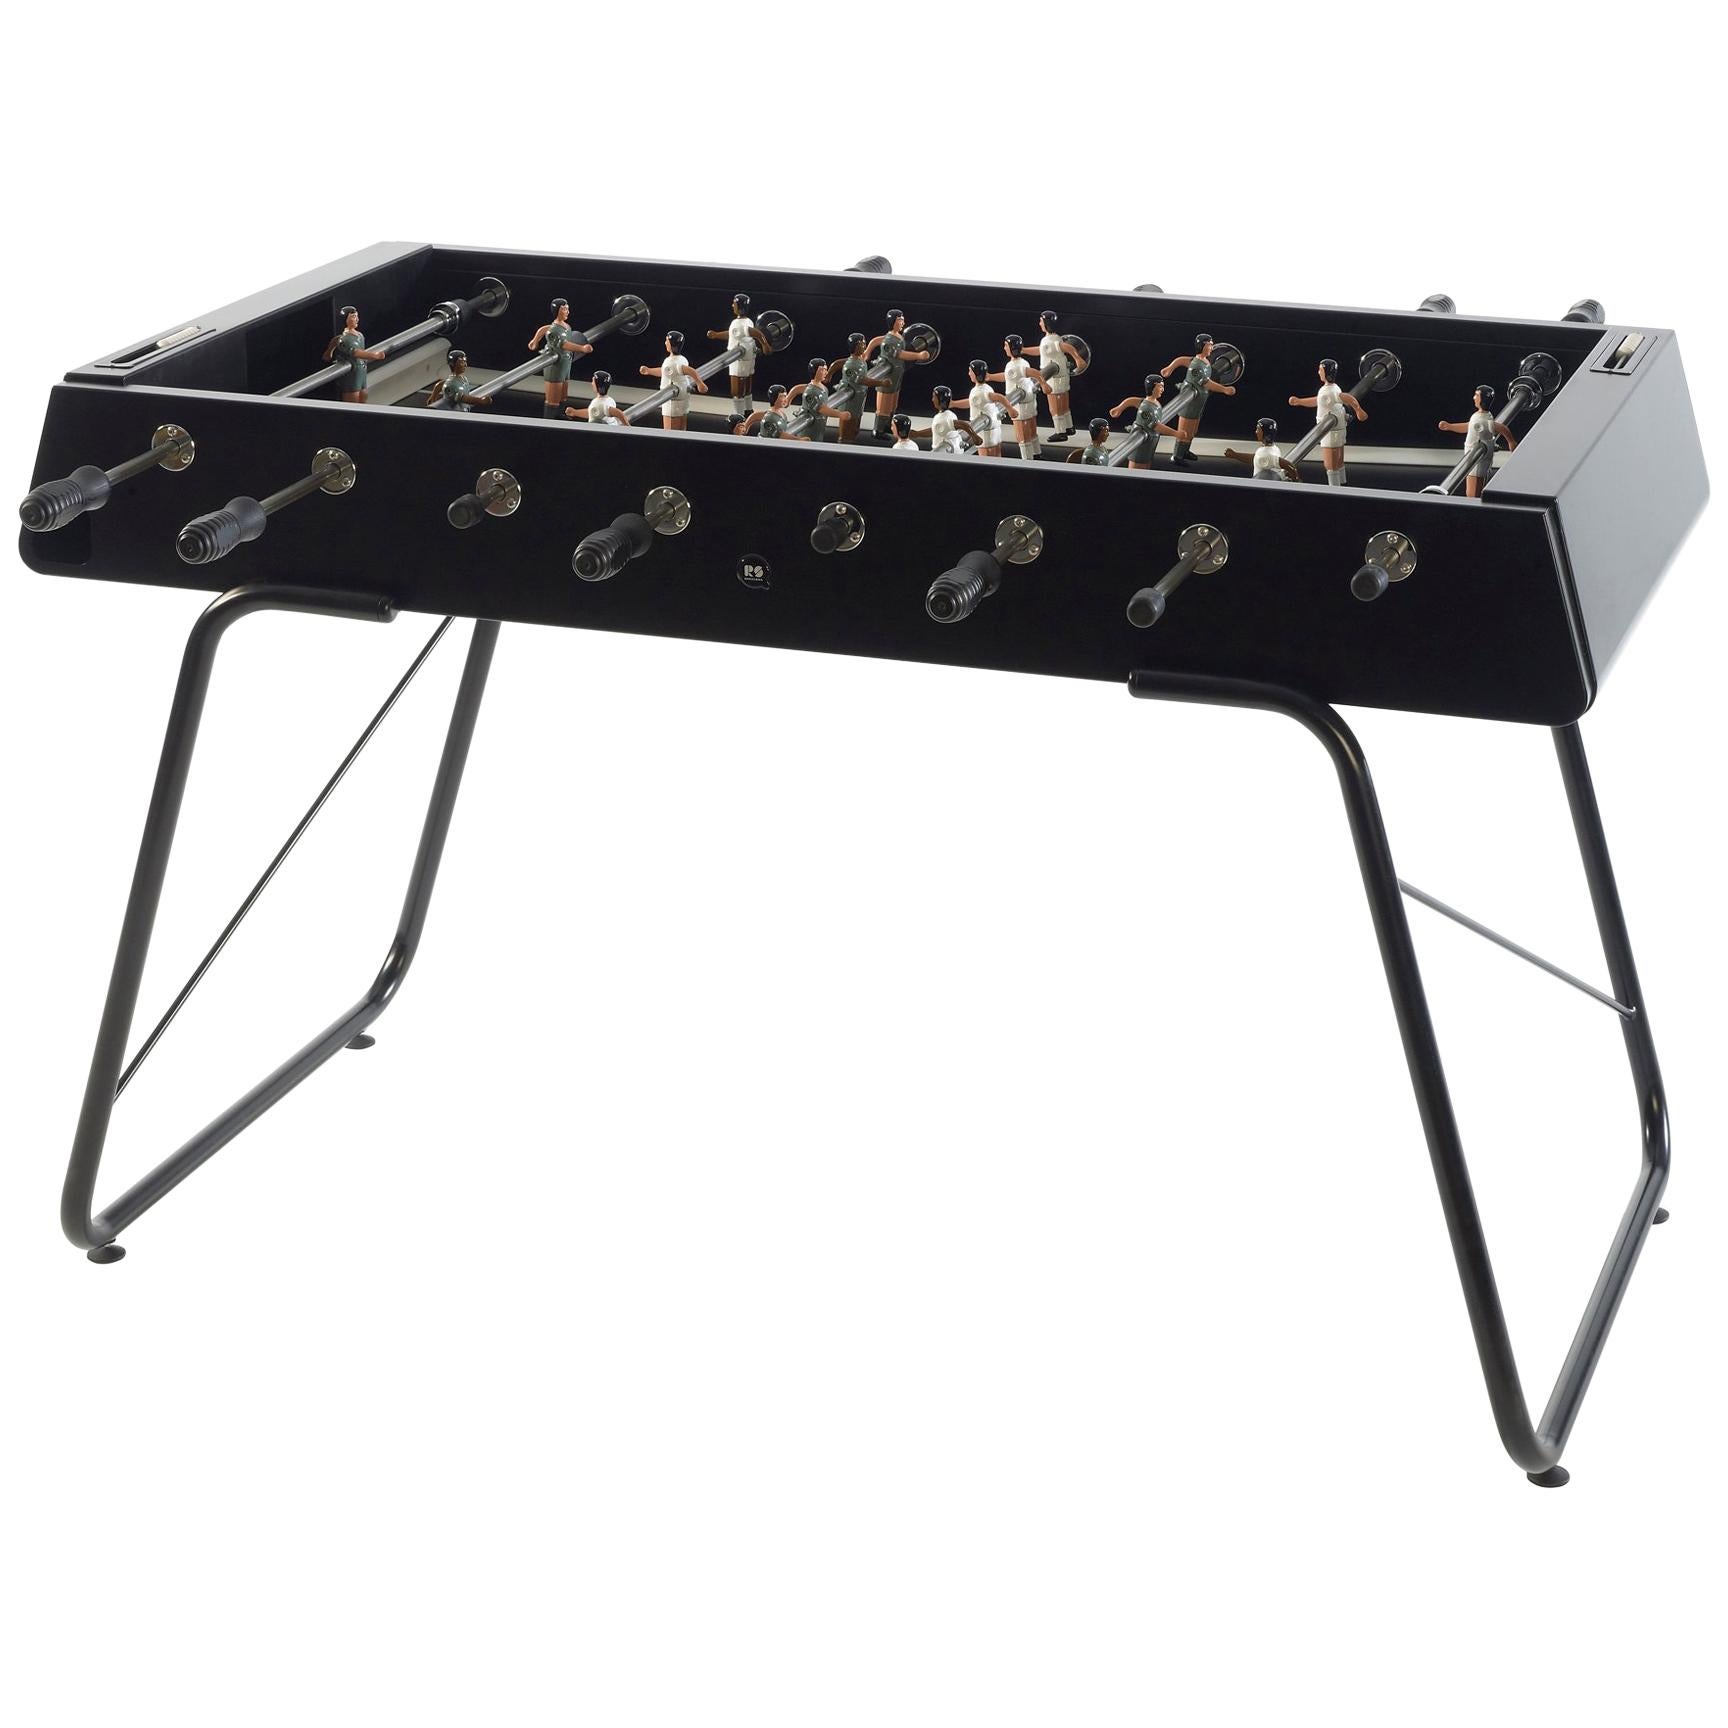 RS Barcelona RS3 Football Table in Black by Rafael Rodriguez For Sale